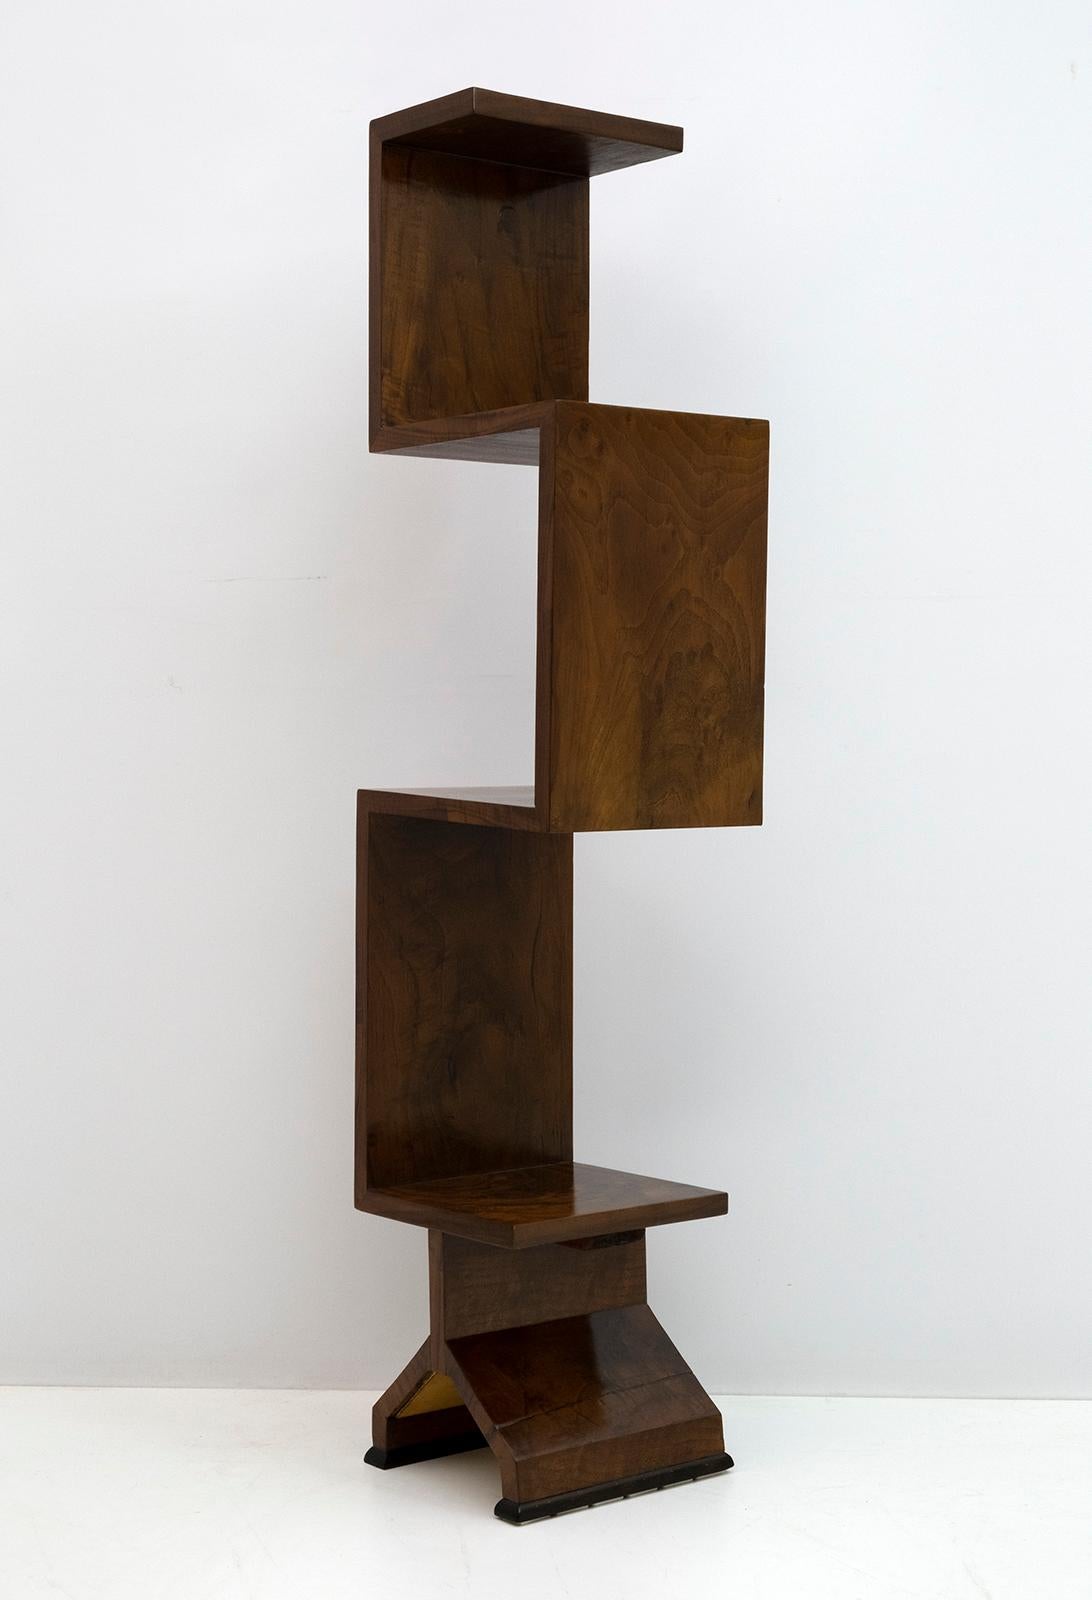 Small open bookcase in walnut and briar walnut, Art Decò style. Finished on both sides, this piece can be used as a room divider.
The bookcase has been restored and polished with shellac